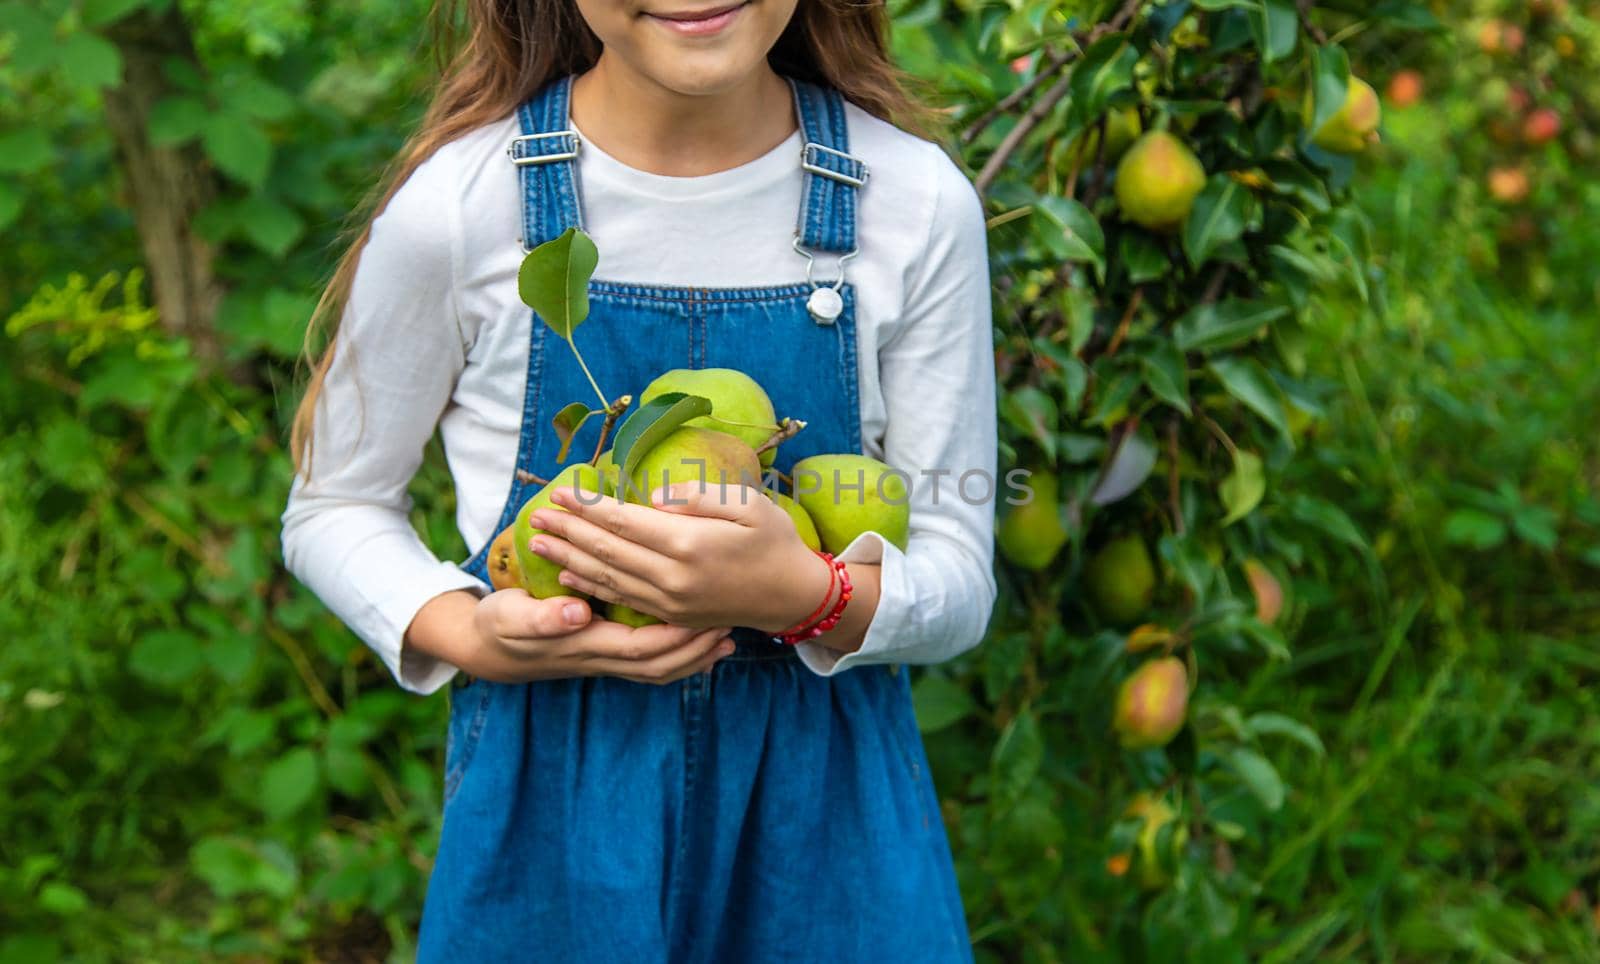 A child harvests pears in the garden. Selective focus. Food.